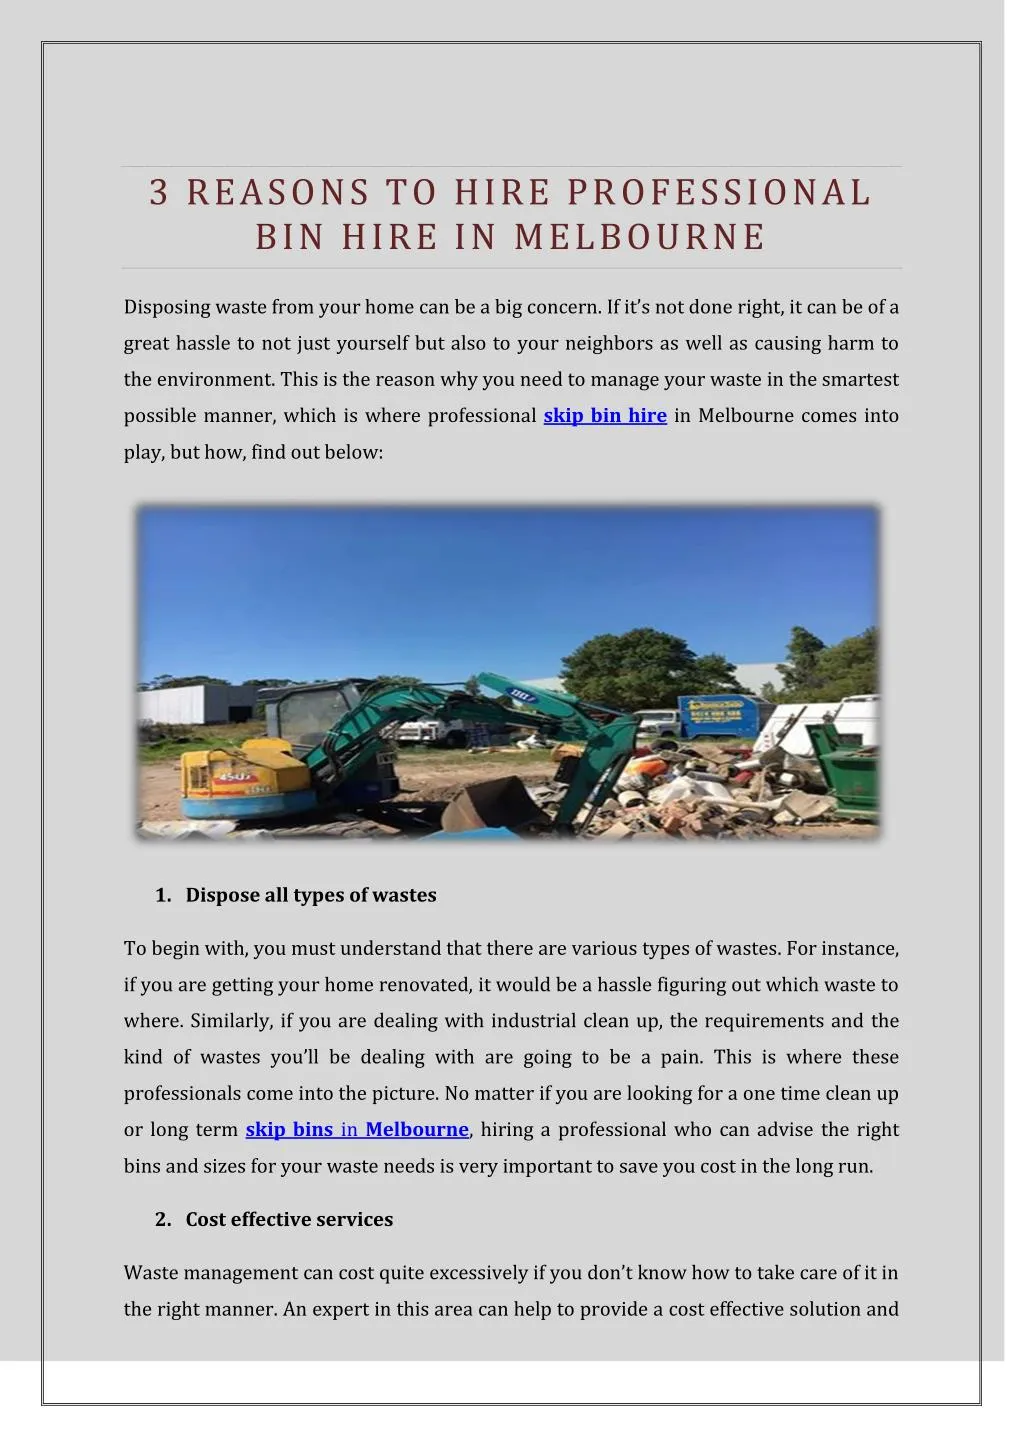 3 reasons to hire professional bin hire